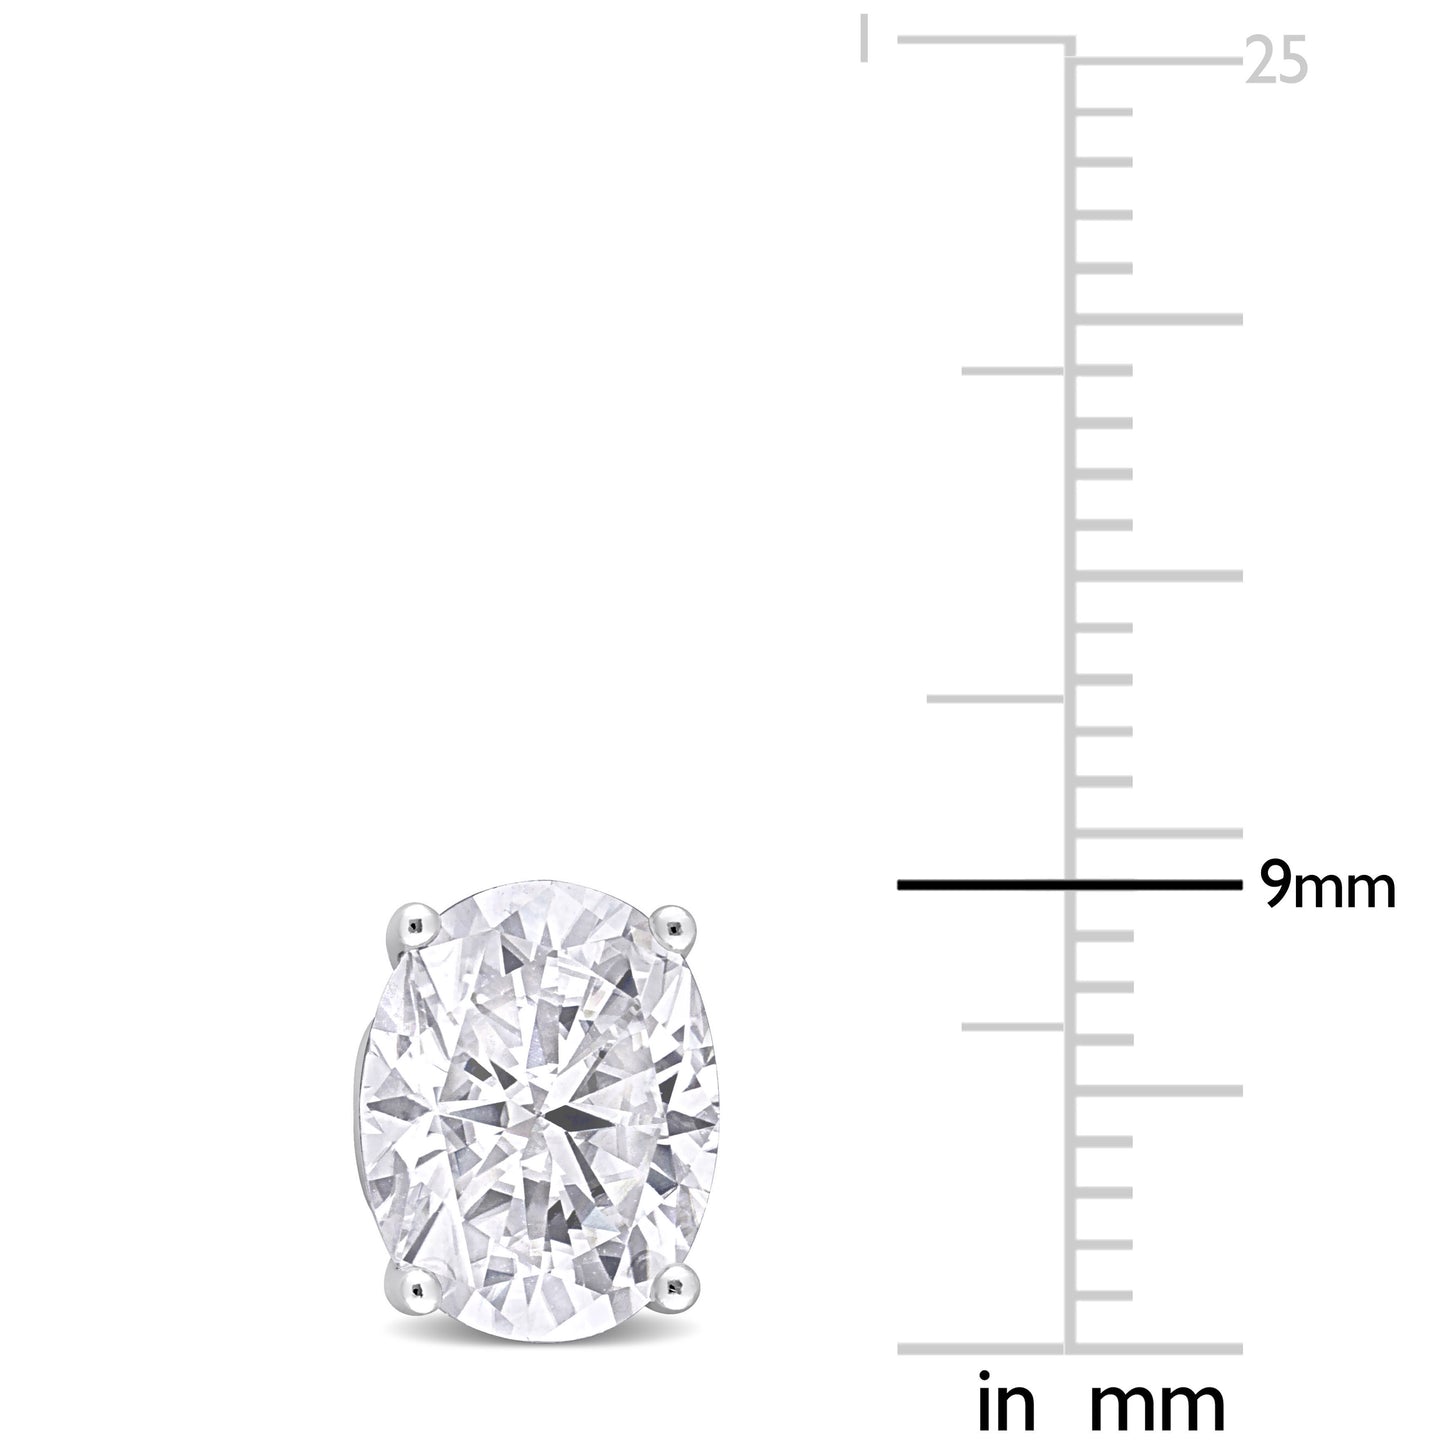 4ct Oval Cut Moissanite Studs in Sterling Silver